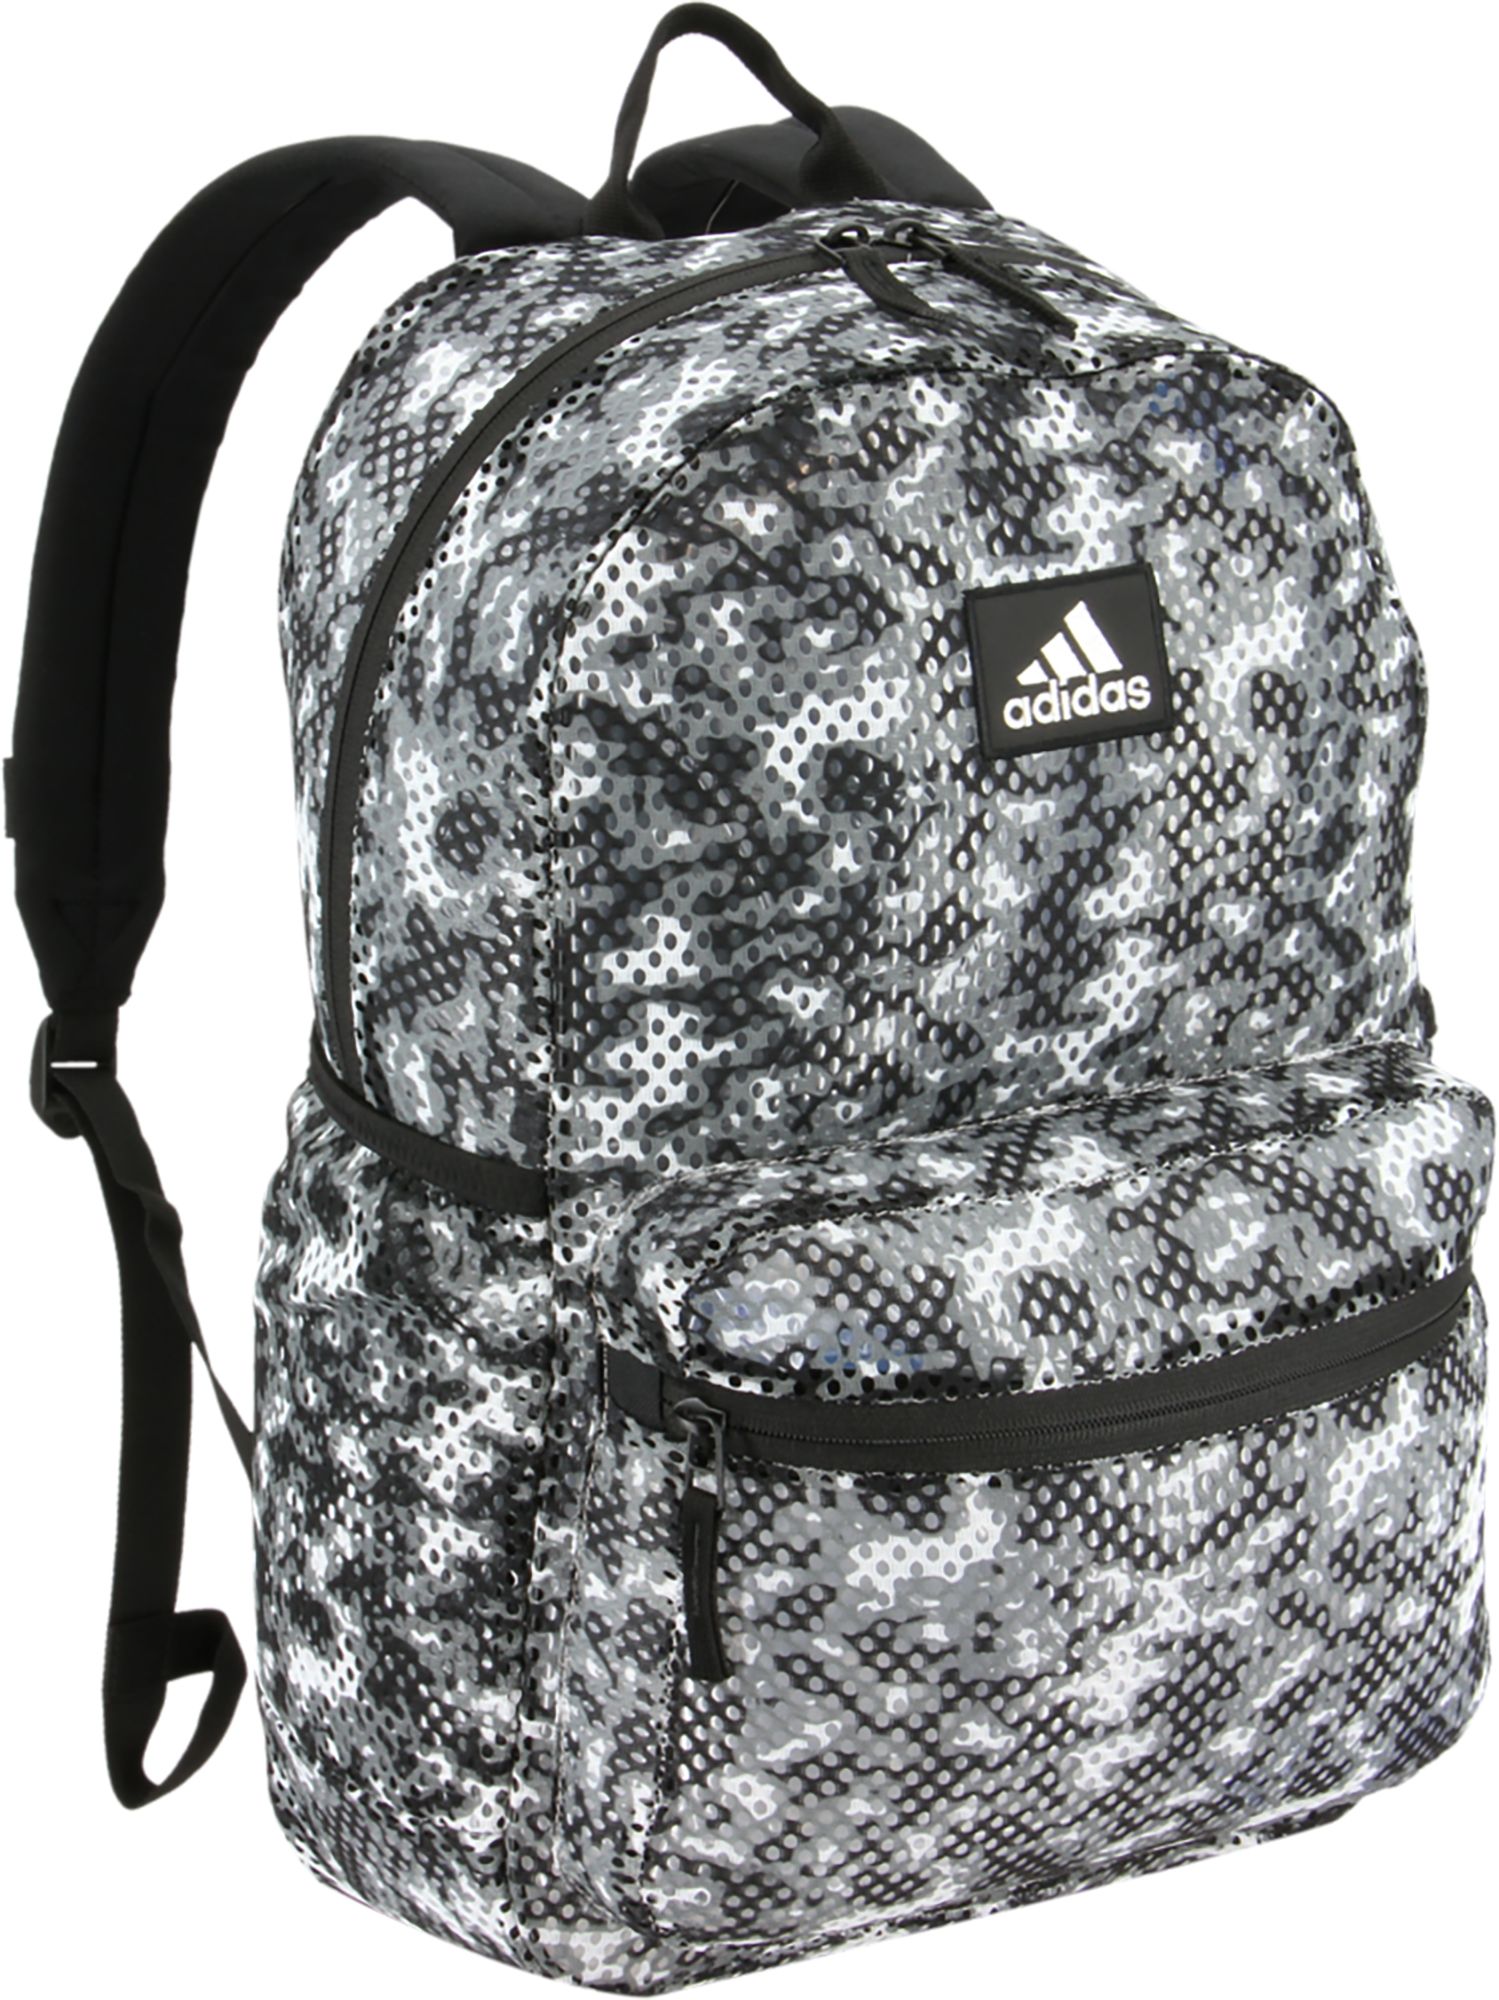 adidas rival backpack dimensions